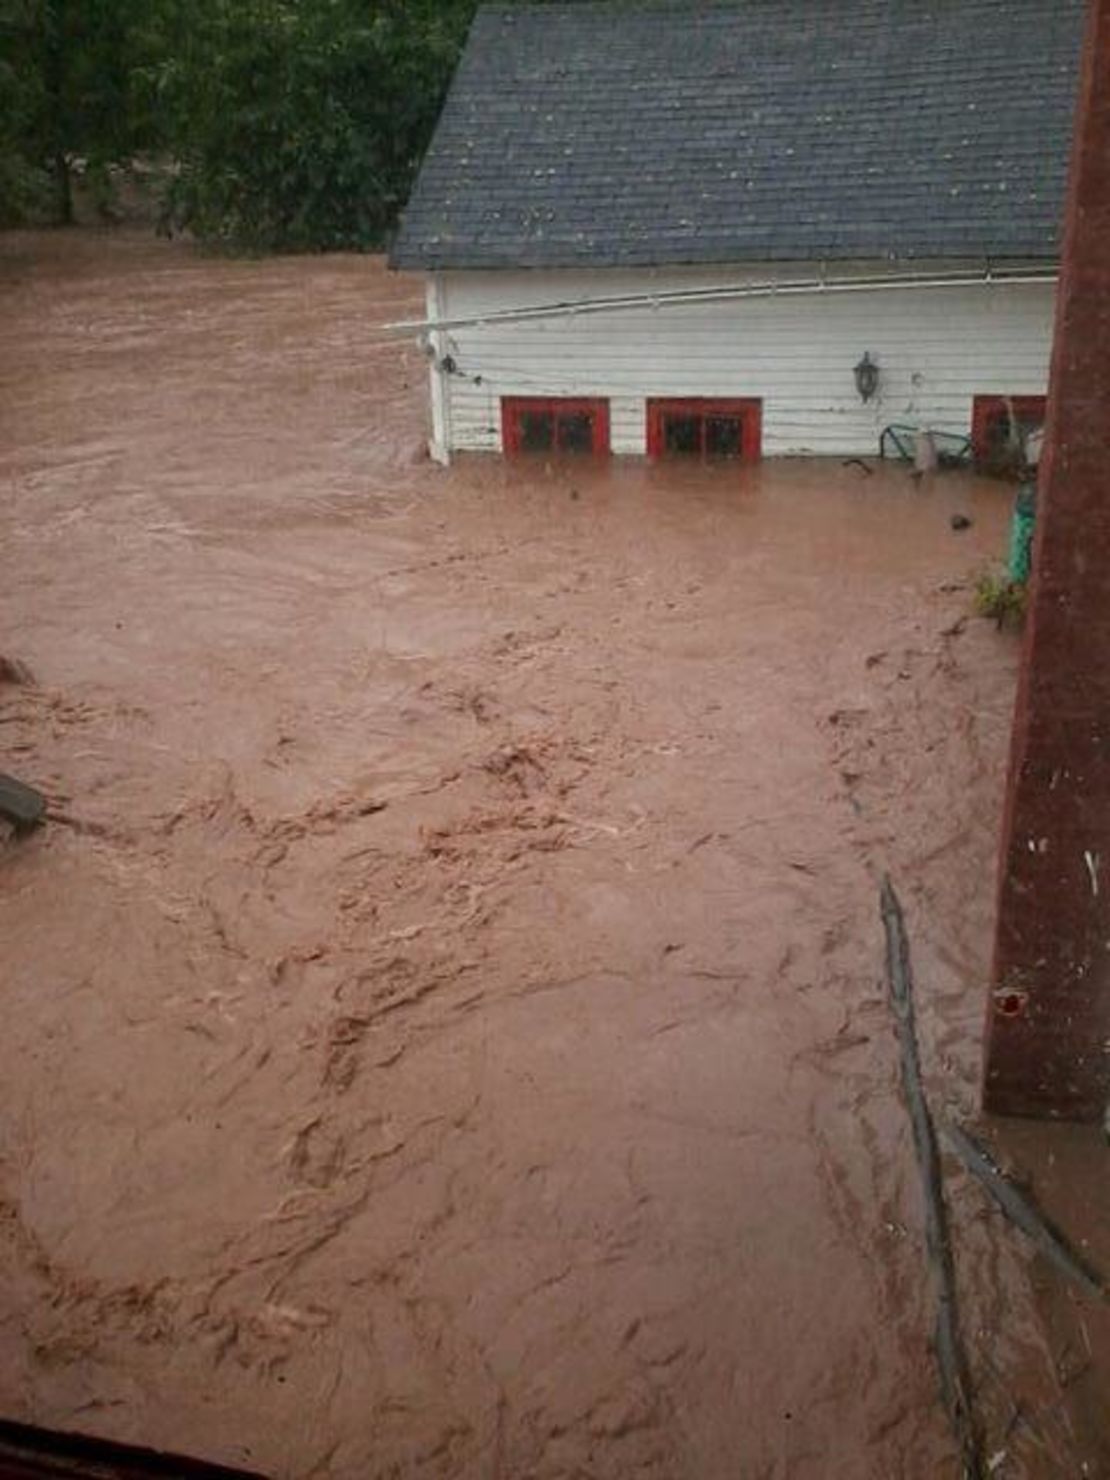 Hurricane Irene demolished the first floor of Ken Aurigema's home and drowned his foundation in creek backwash.